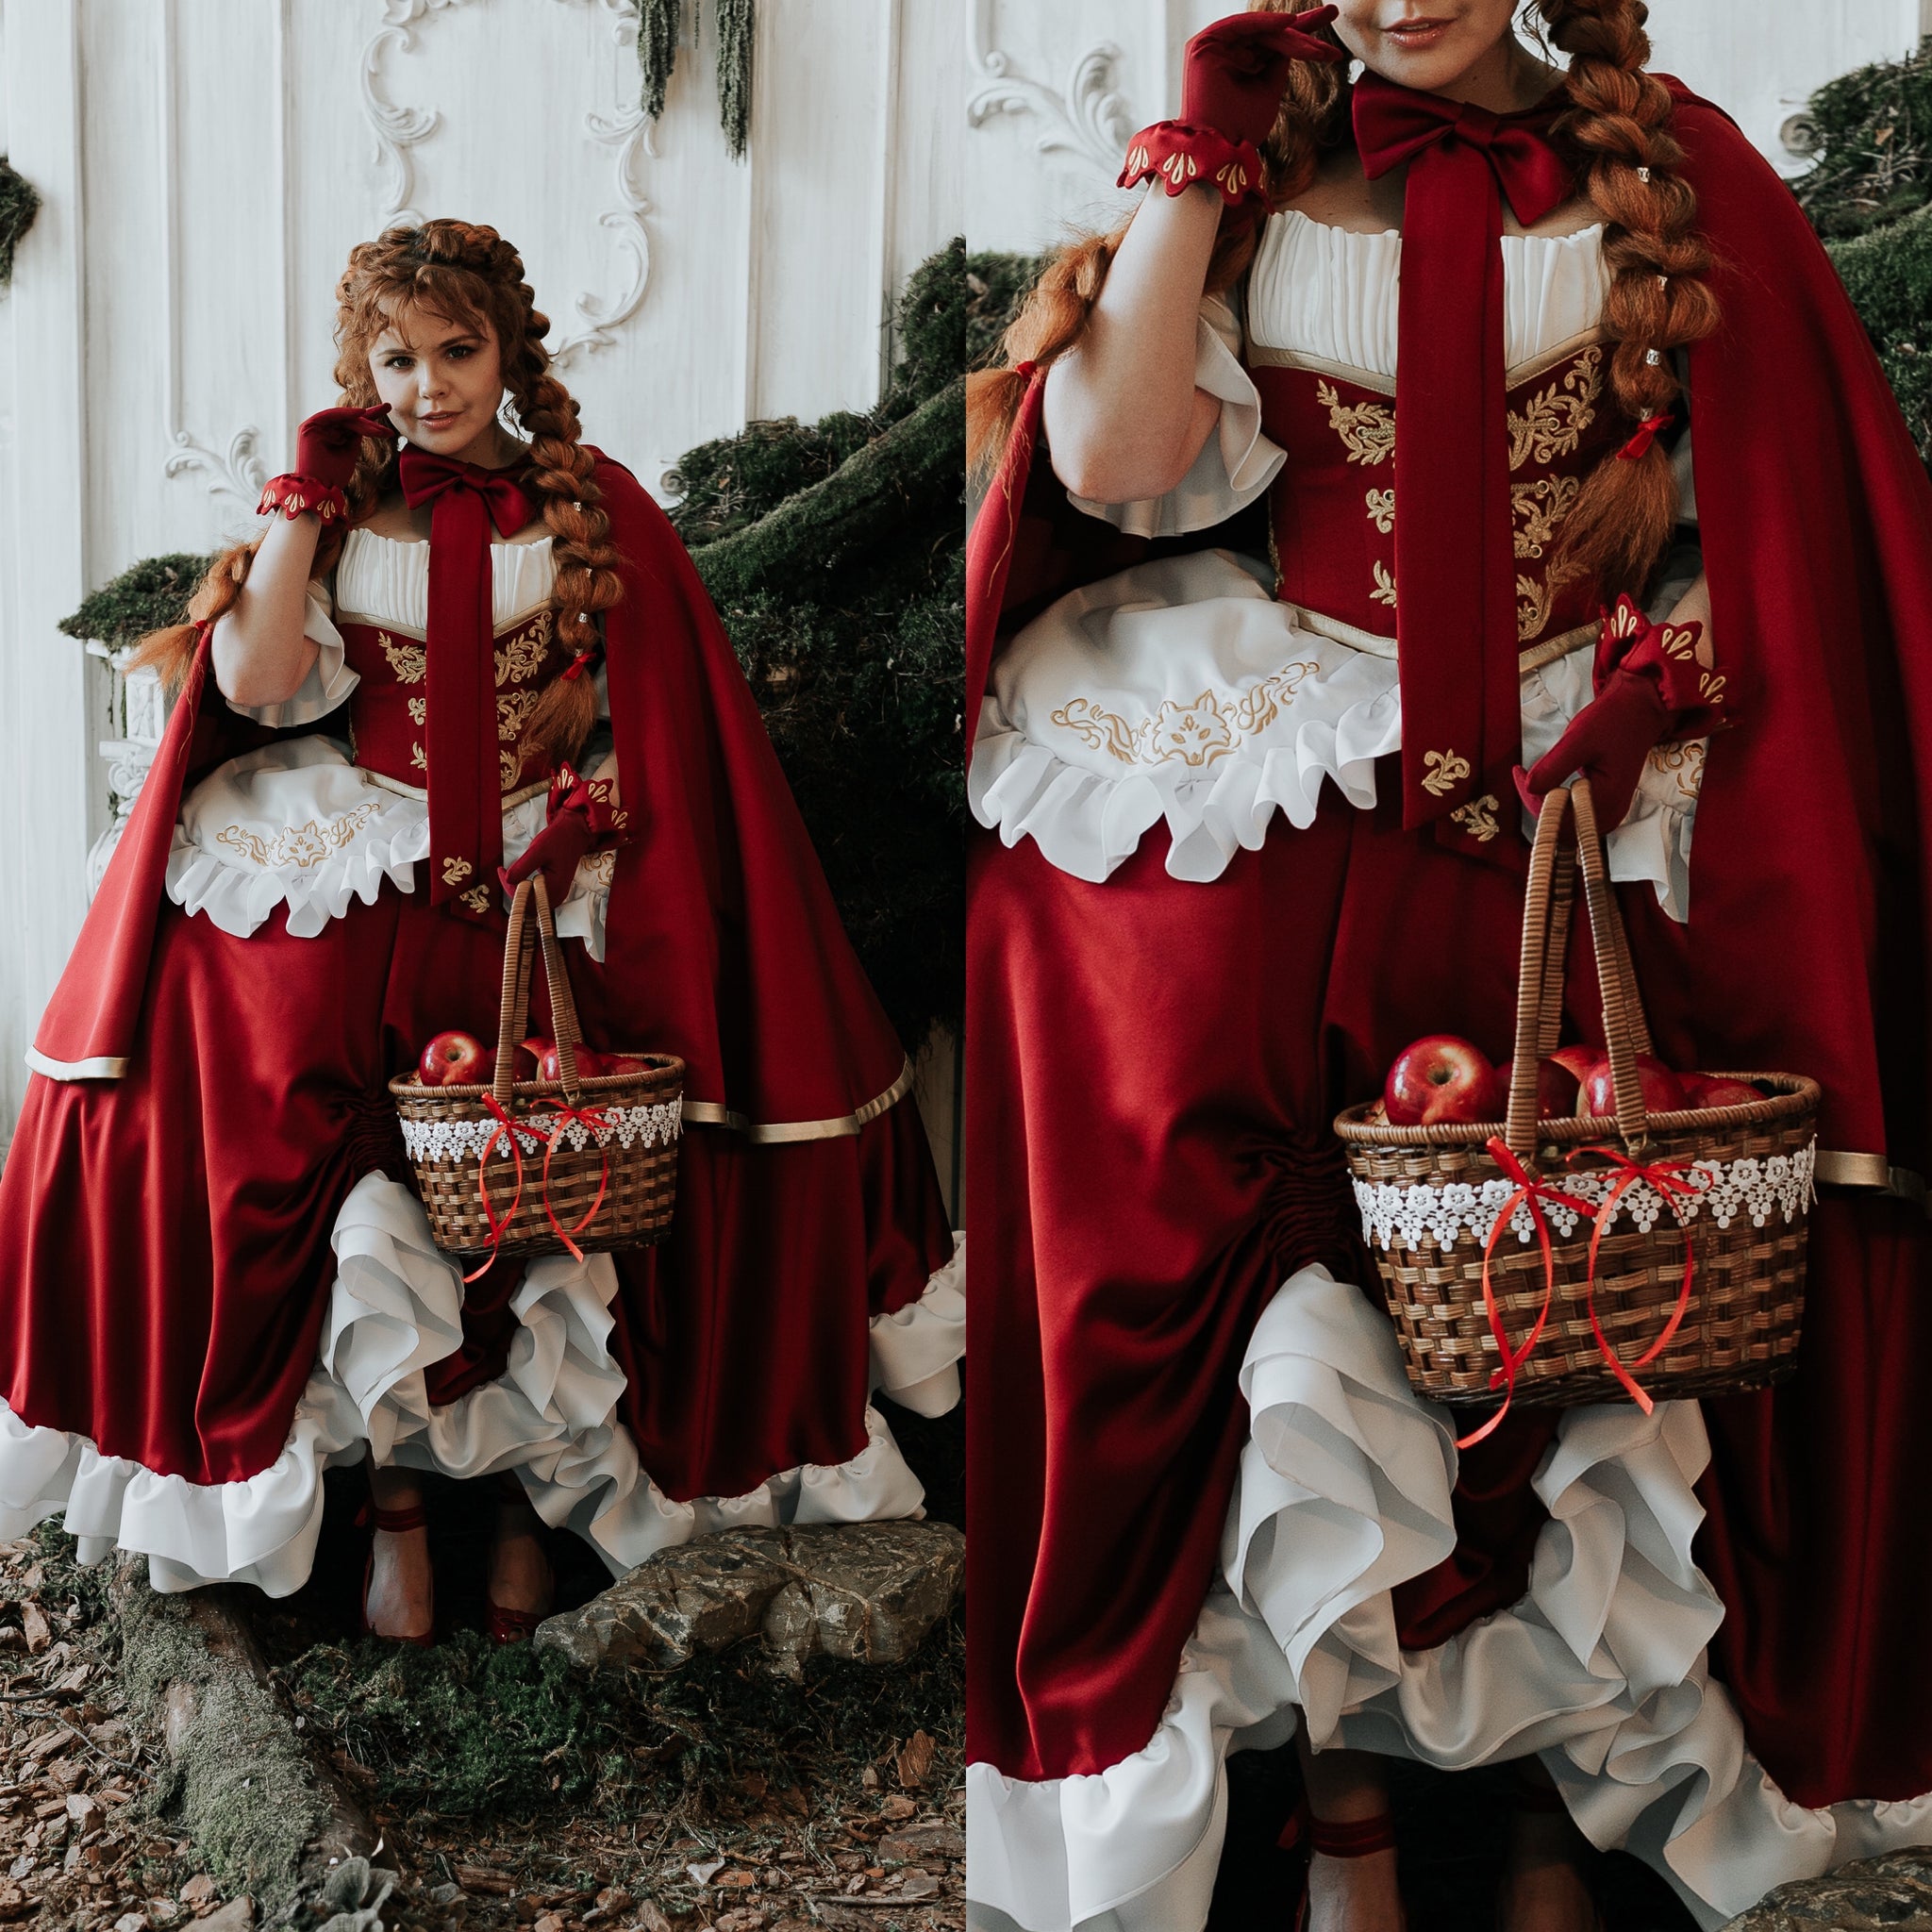 Red Riding Hood (Cosplay) - Red Riding Hood (Character)